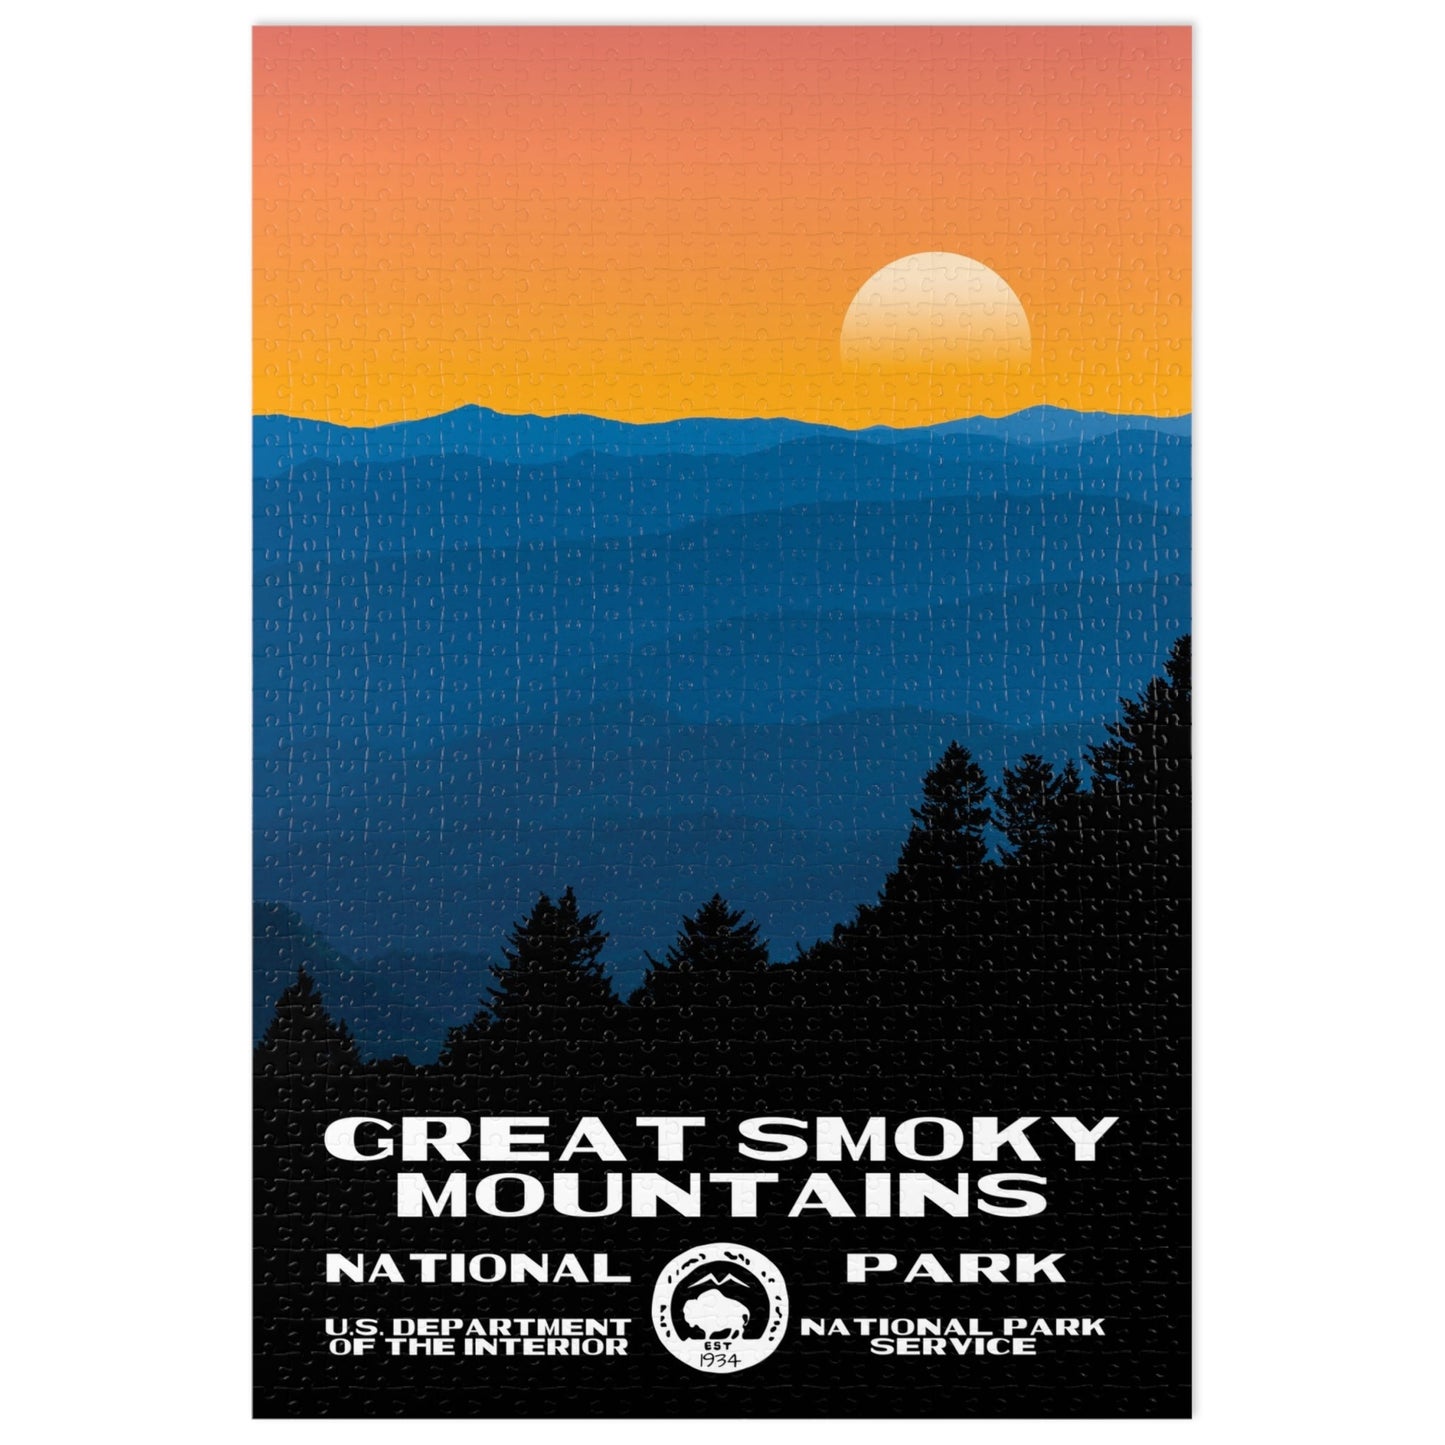 Great Smoky Mountains National Park Jigsaw Puzzle - 1000 Pieces